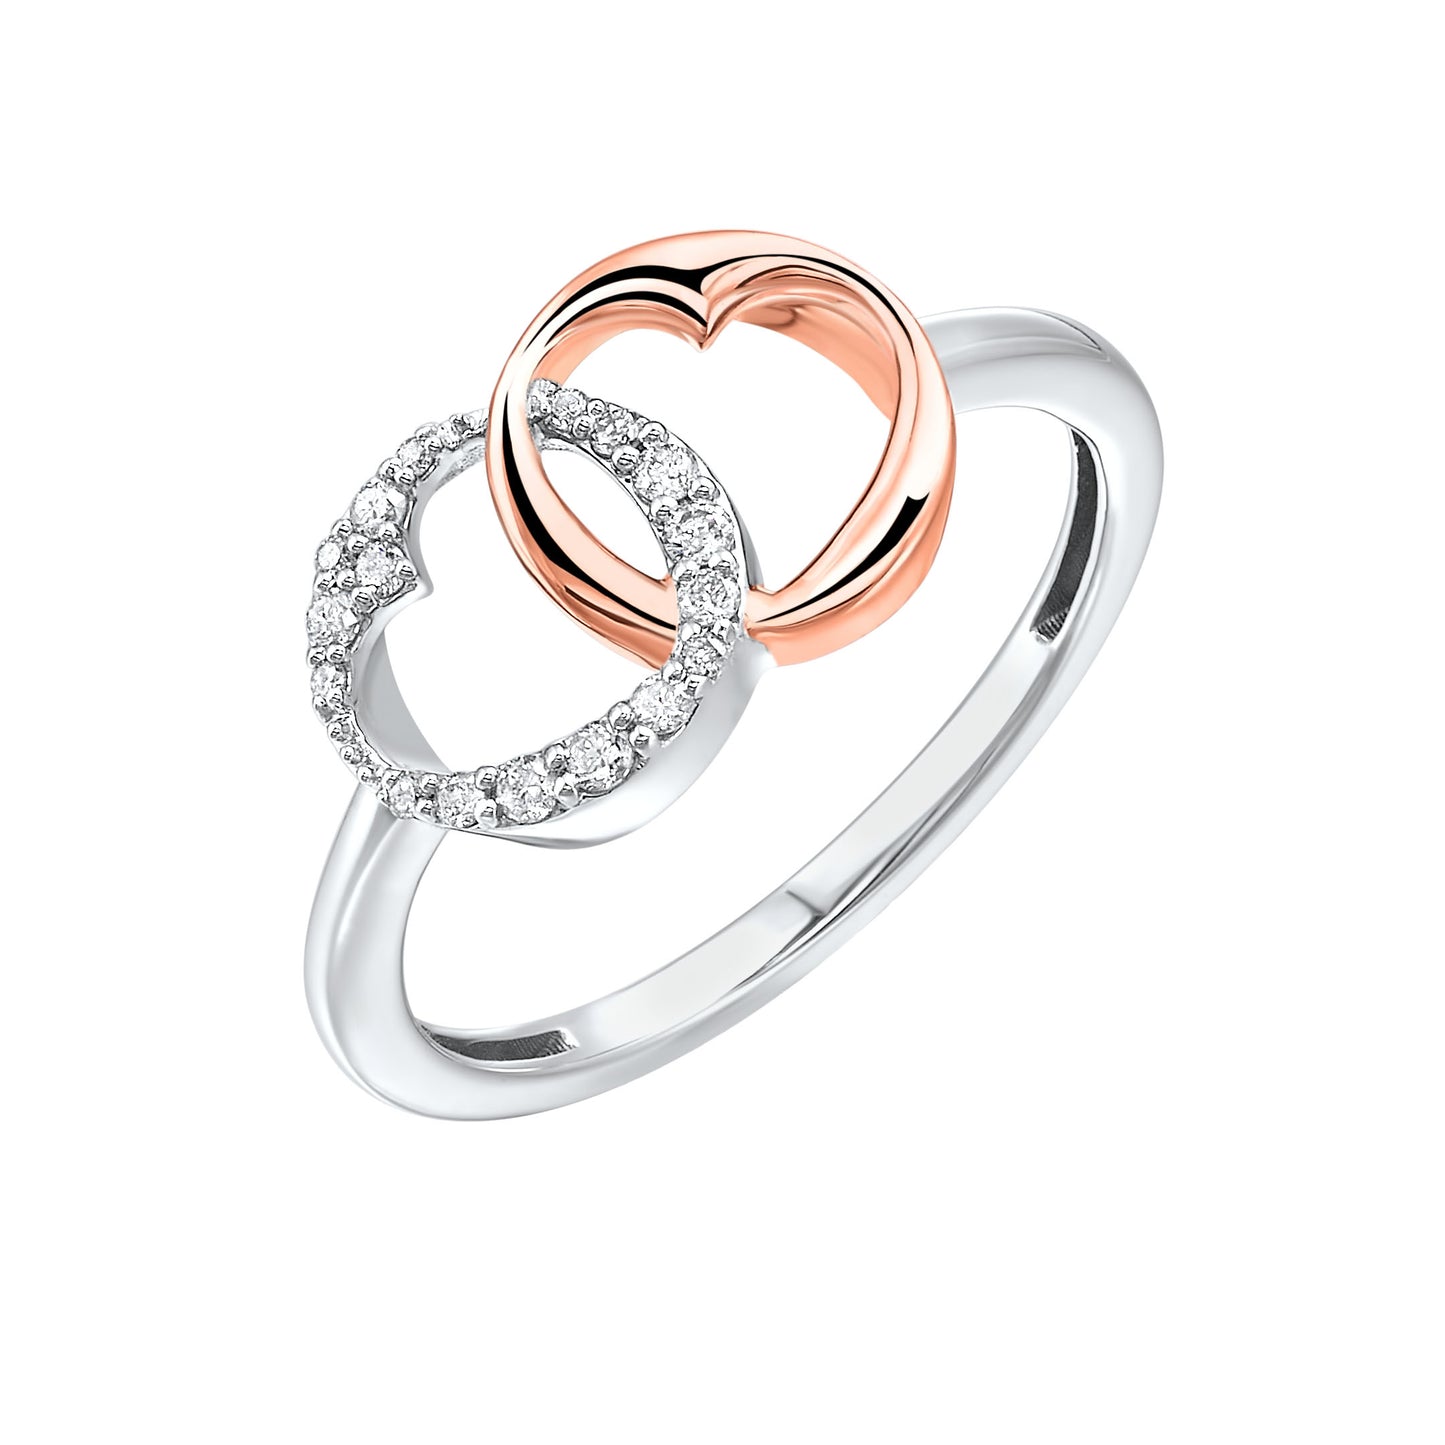 Silver and Gold Diamond Heart Ring